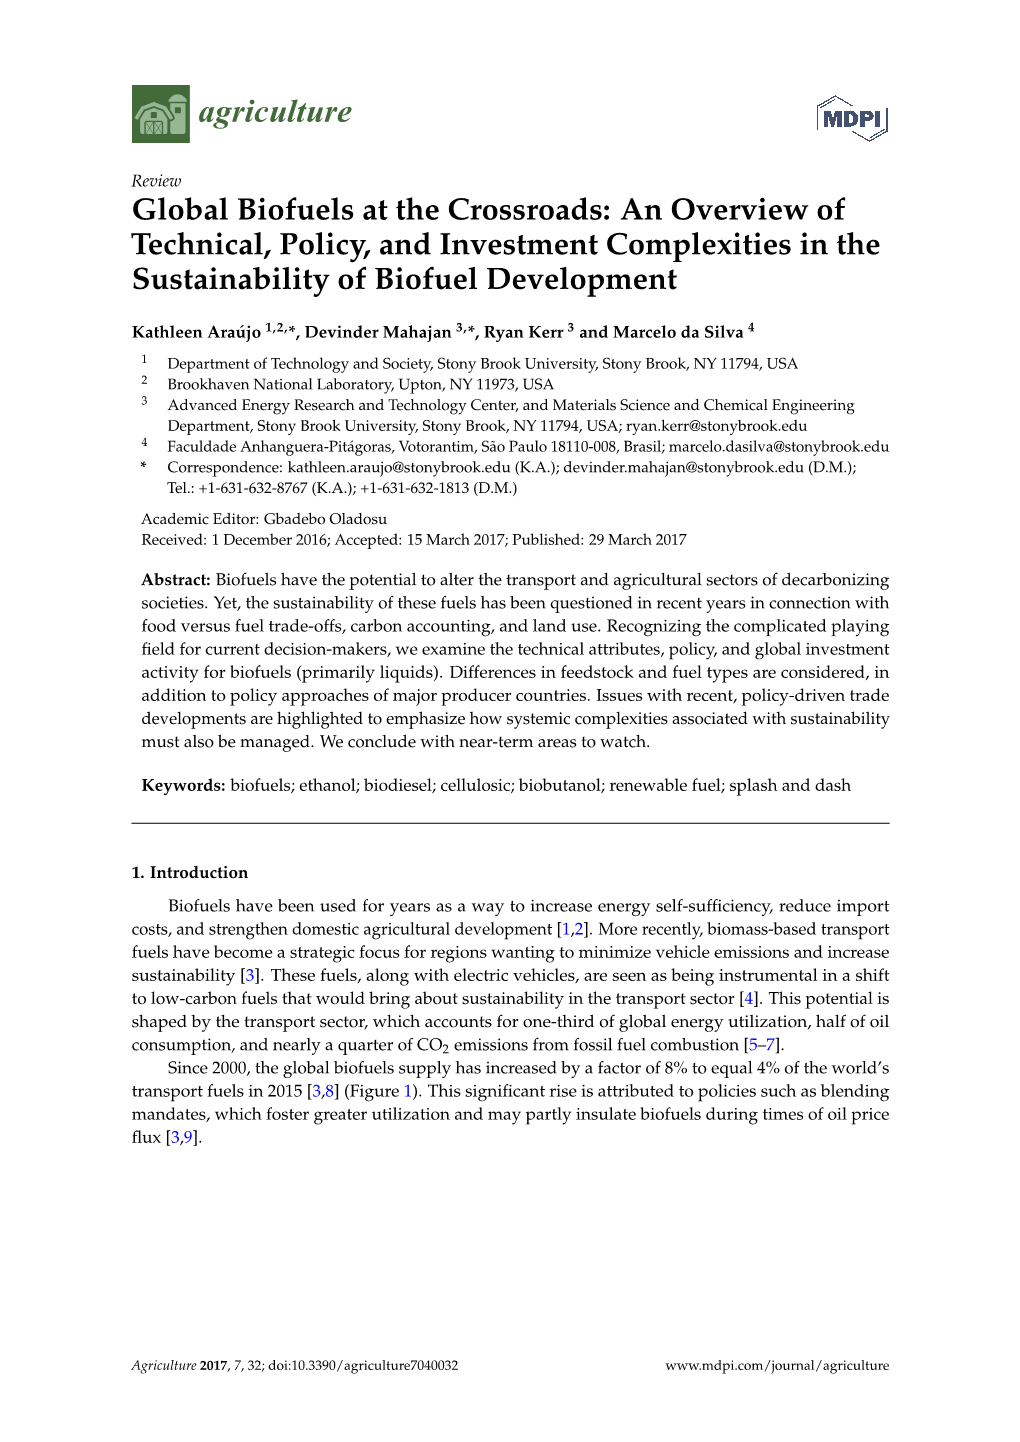 Global Biofuels at the Crossroads: an Overview of Technical, Policy, and Investment Complexities in the Sustainability of Biofuel Development